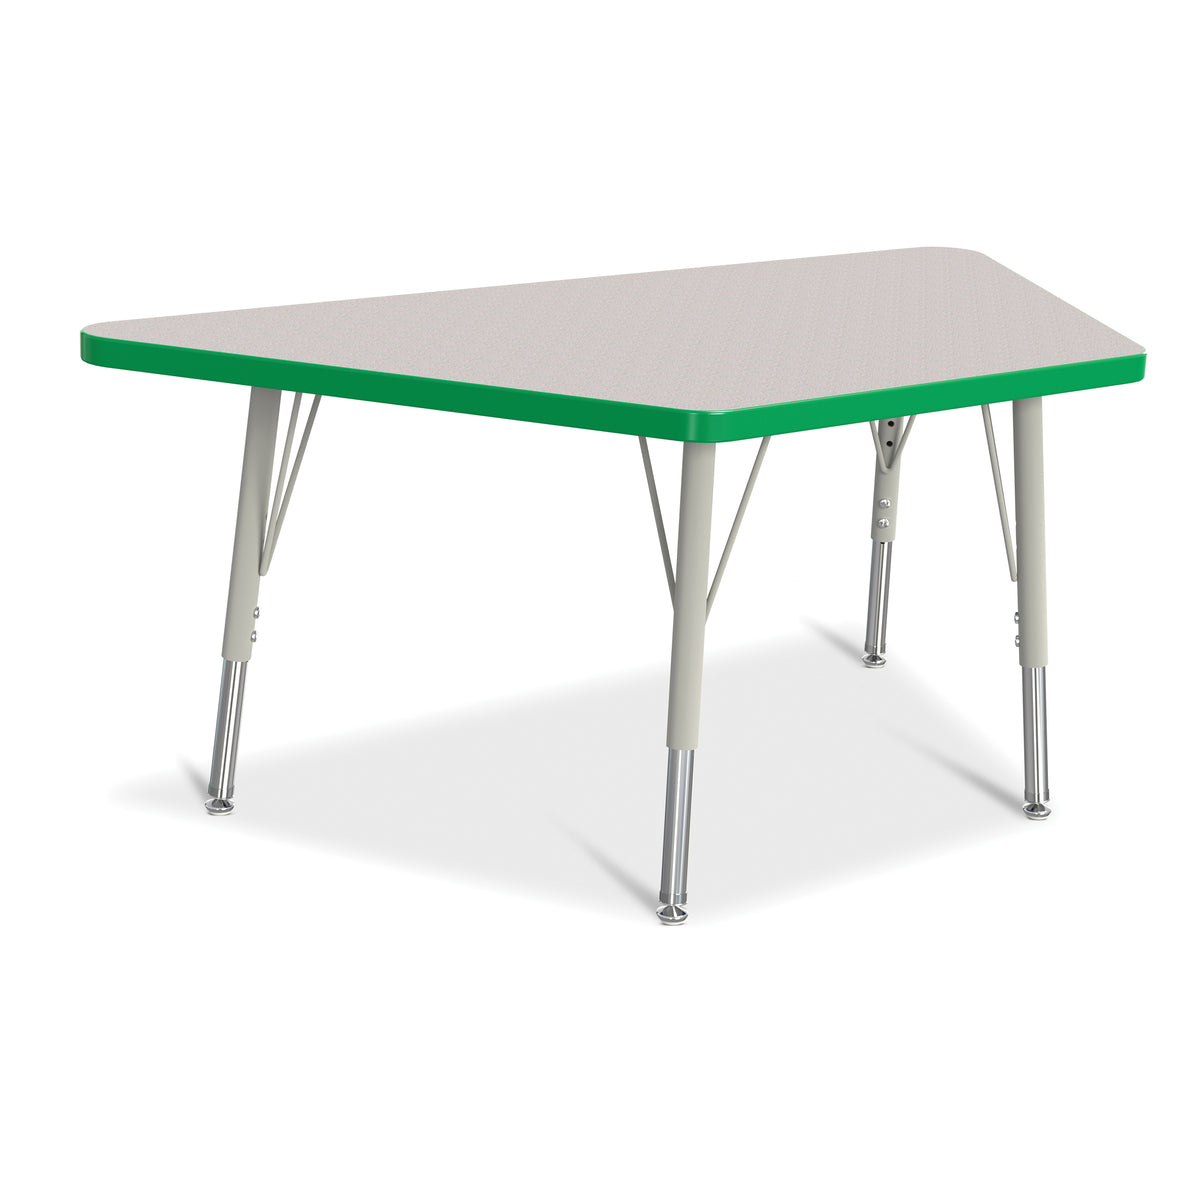 6438JCE119, Berries Trapezoid Activity Tables - 24" X 48", E-height - Freckled Gray/Green/Gray